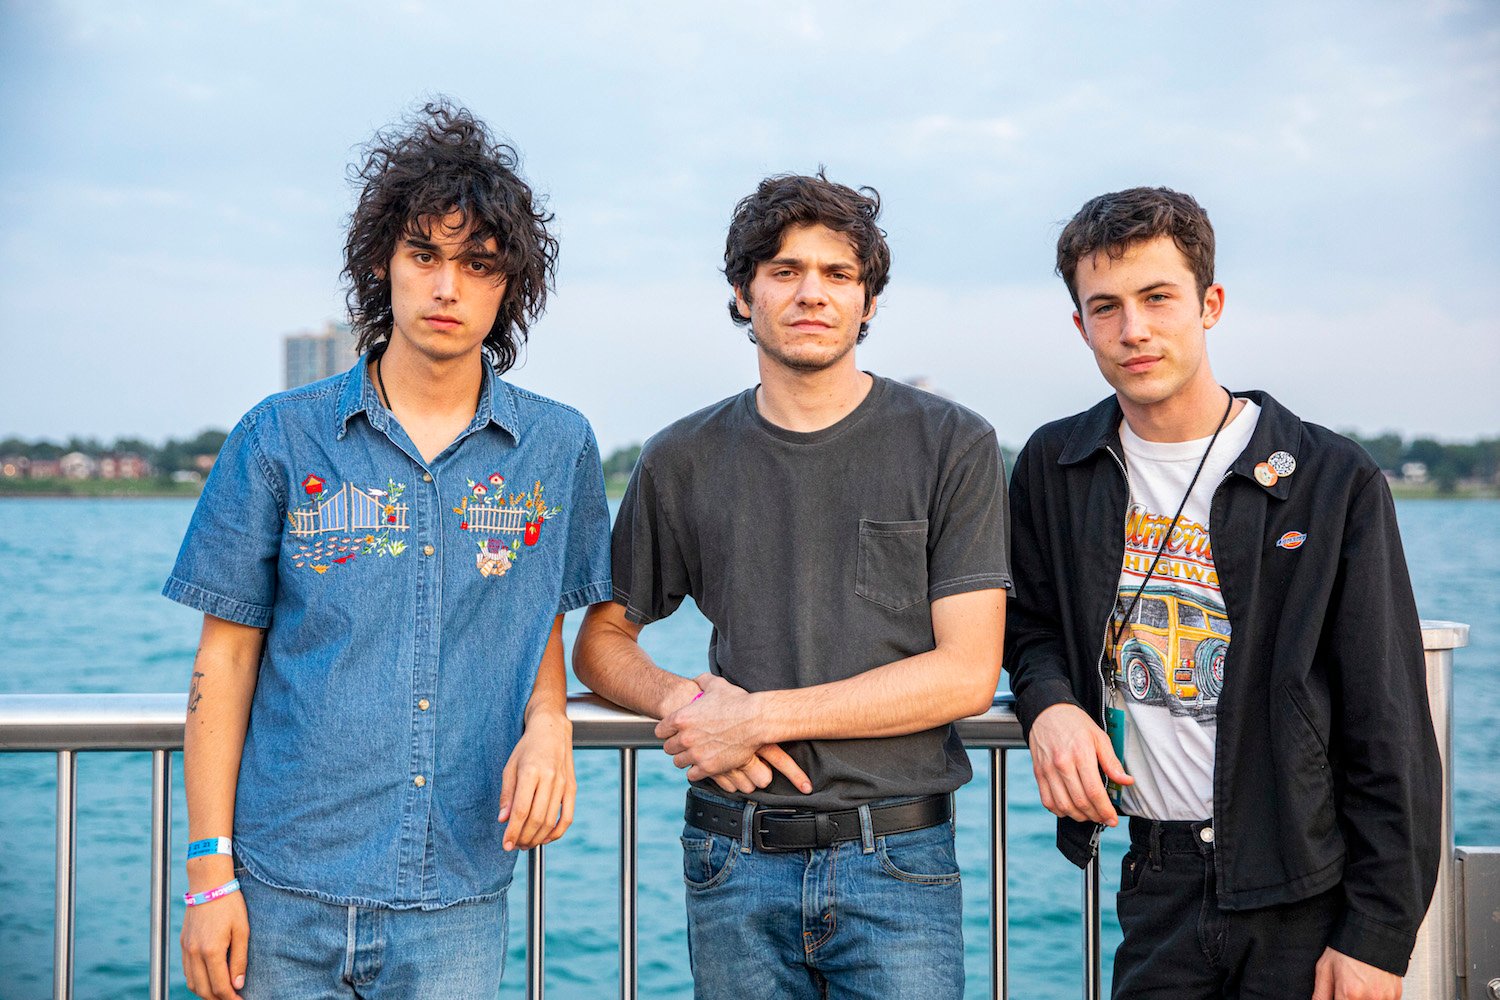 (L-R) Cole Preston, Braeden Lemasters and Dylan Minnette of Wallows pose backstage on Day 1 of MoPop Festival 2019 at West Riverfront Park on July 27, 2019 in Detroit, Michigan.